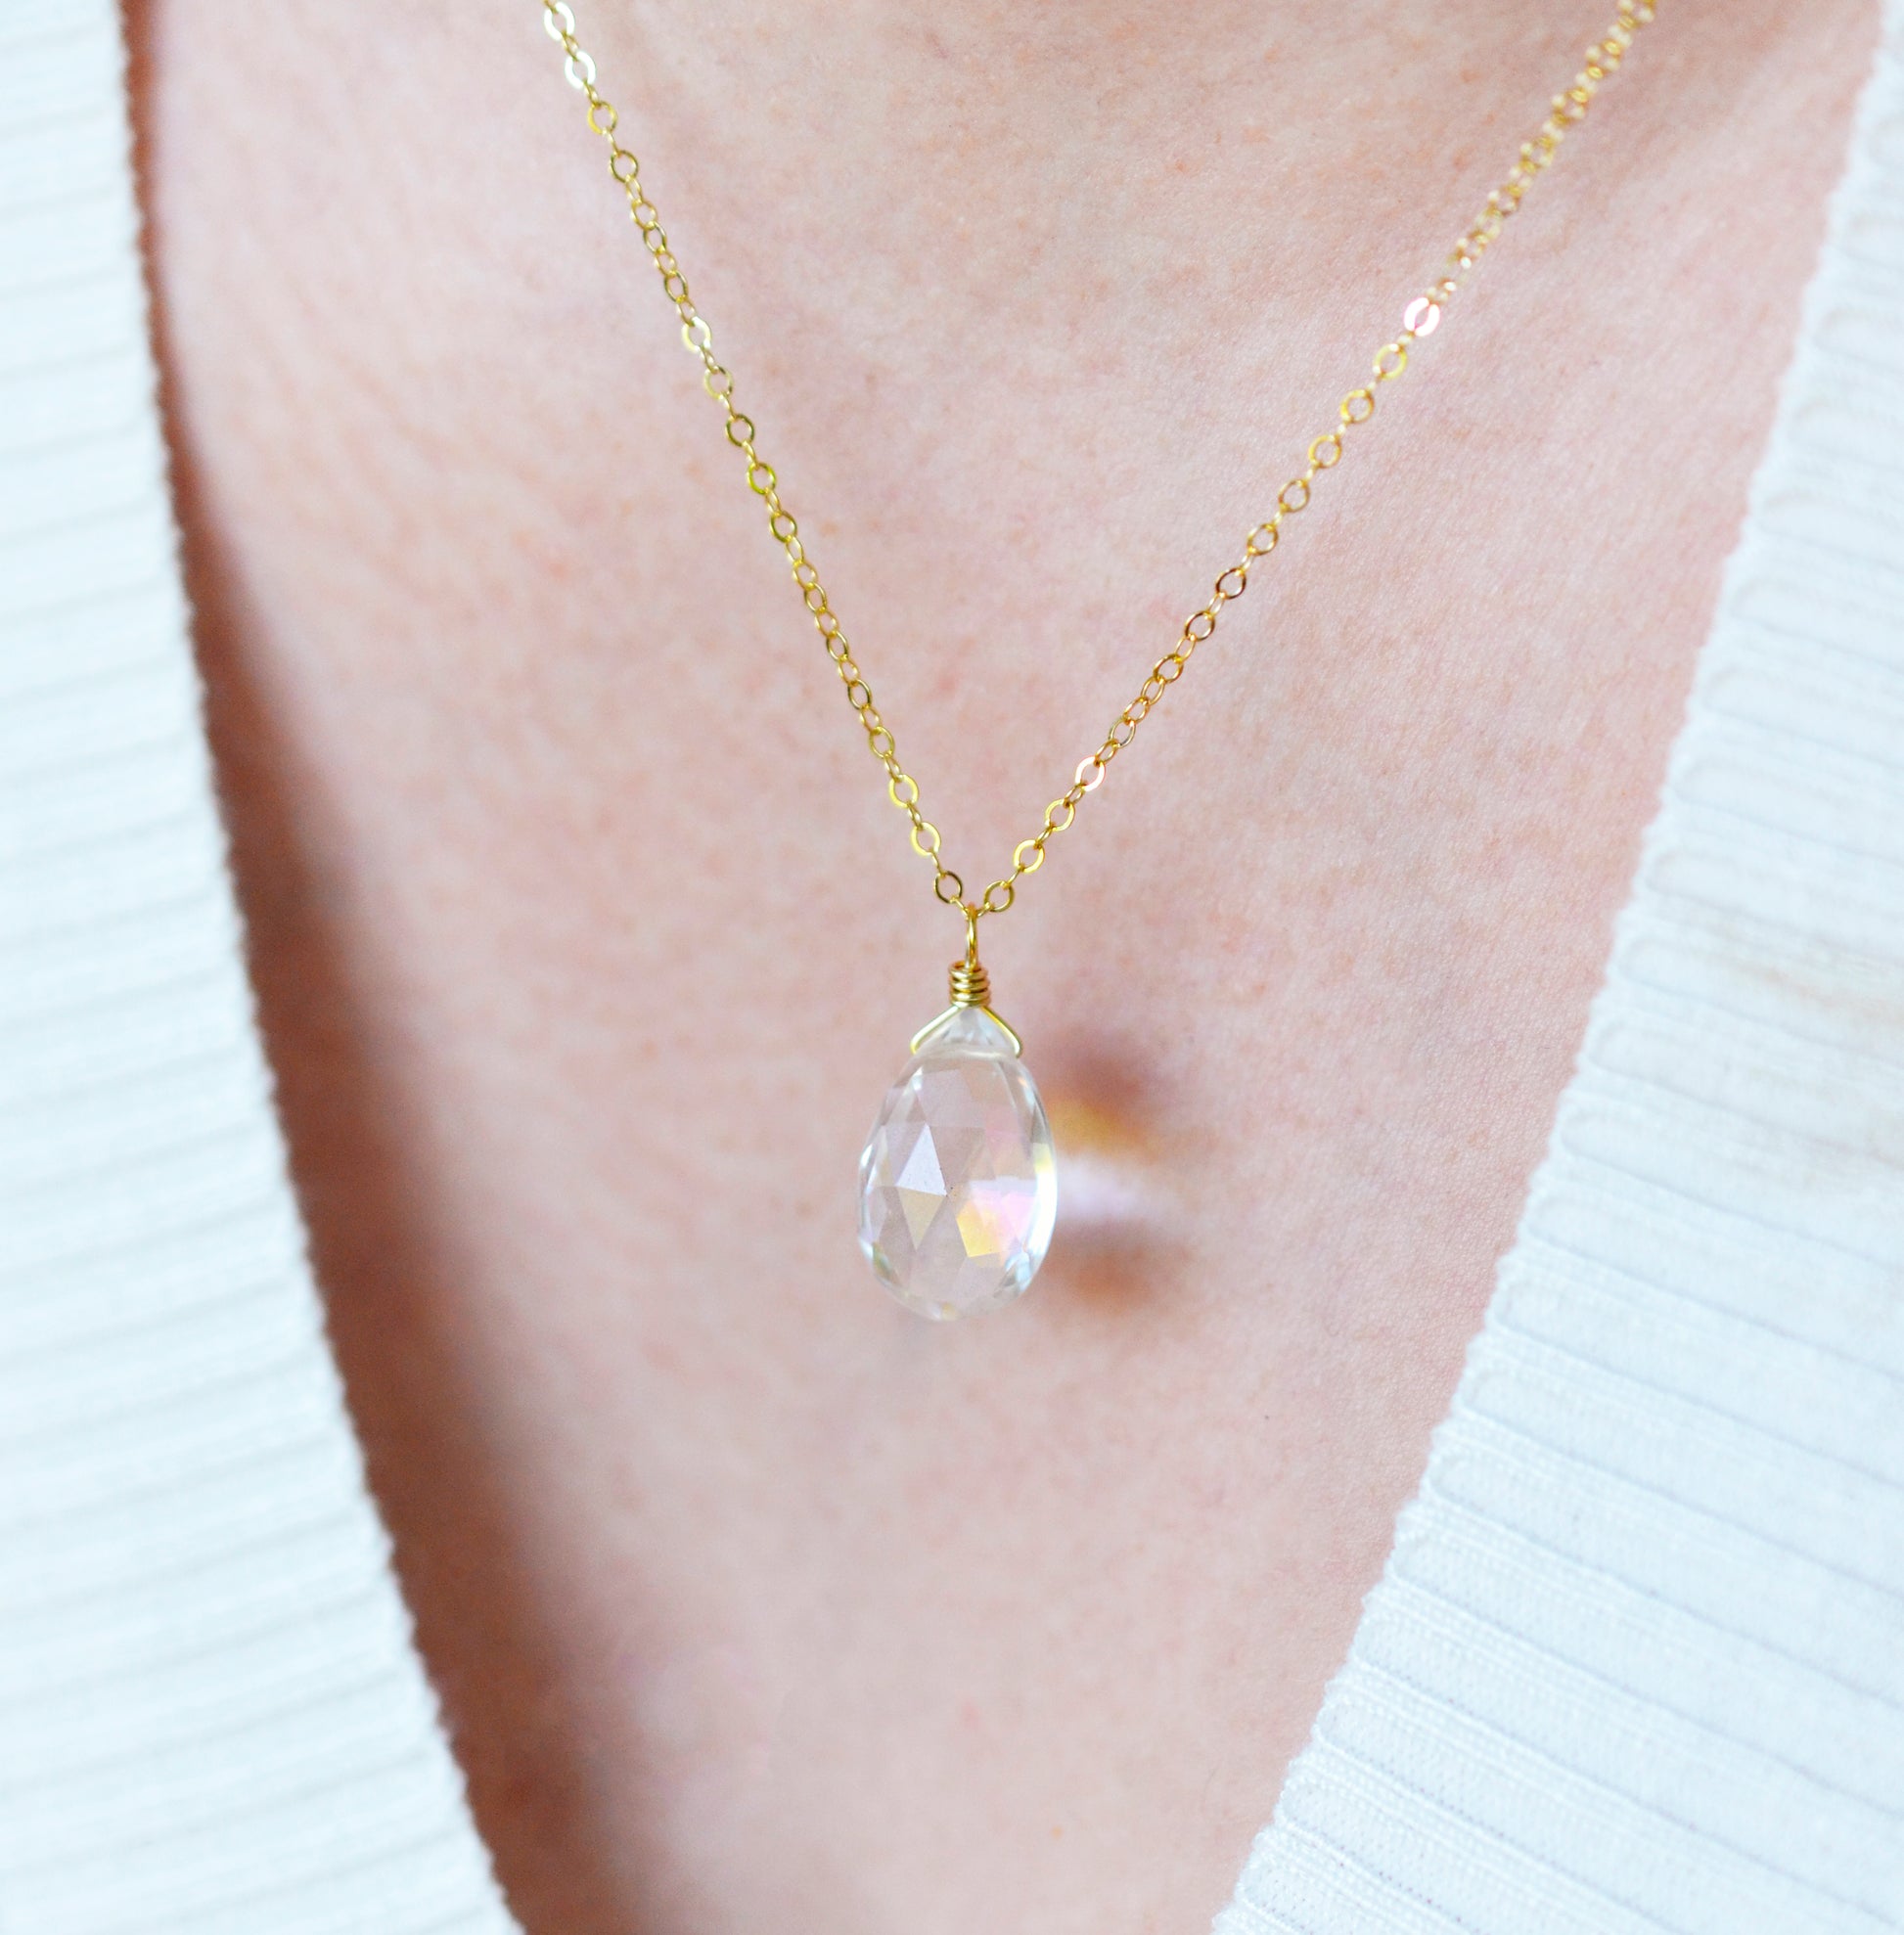 Modeled image of Mystic Topaz necklace. The gemstone is a faceted teardrop shape. The 14k gold filled style is shown.